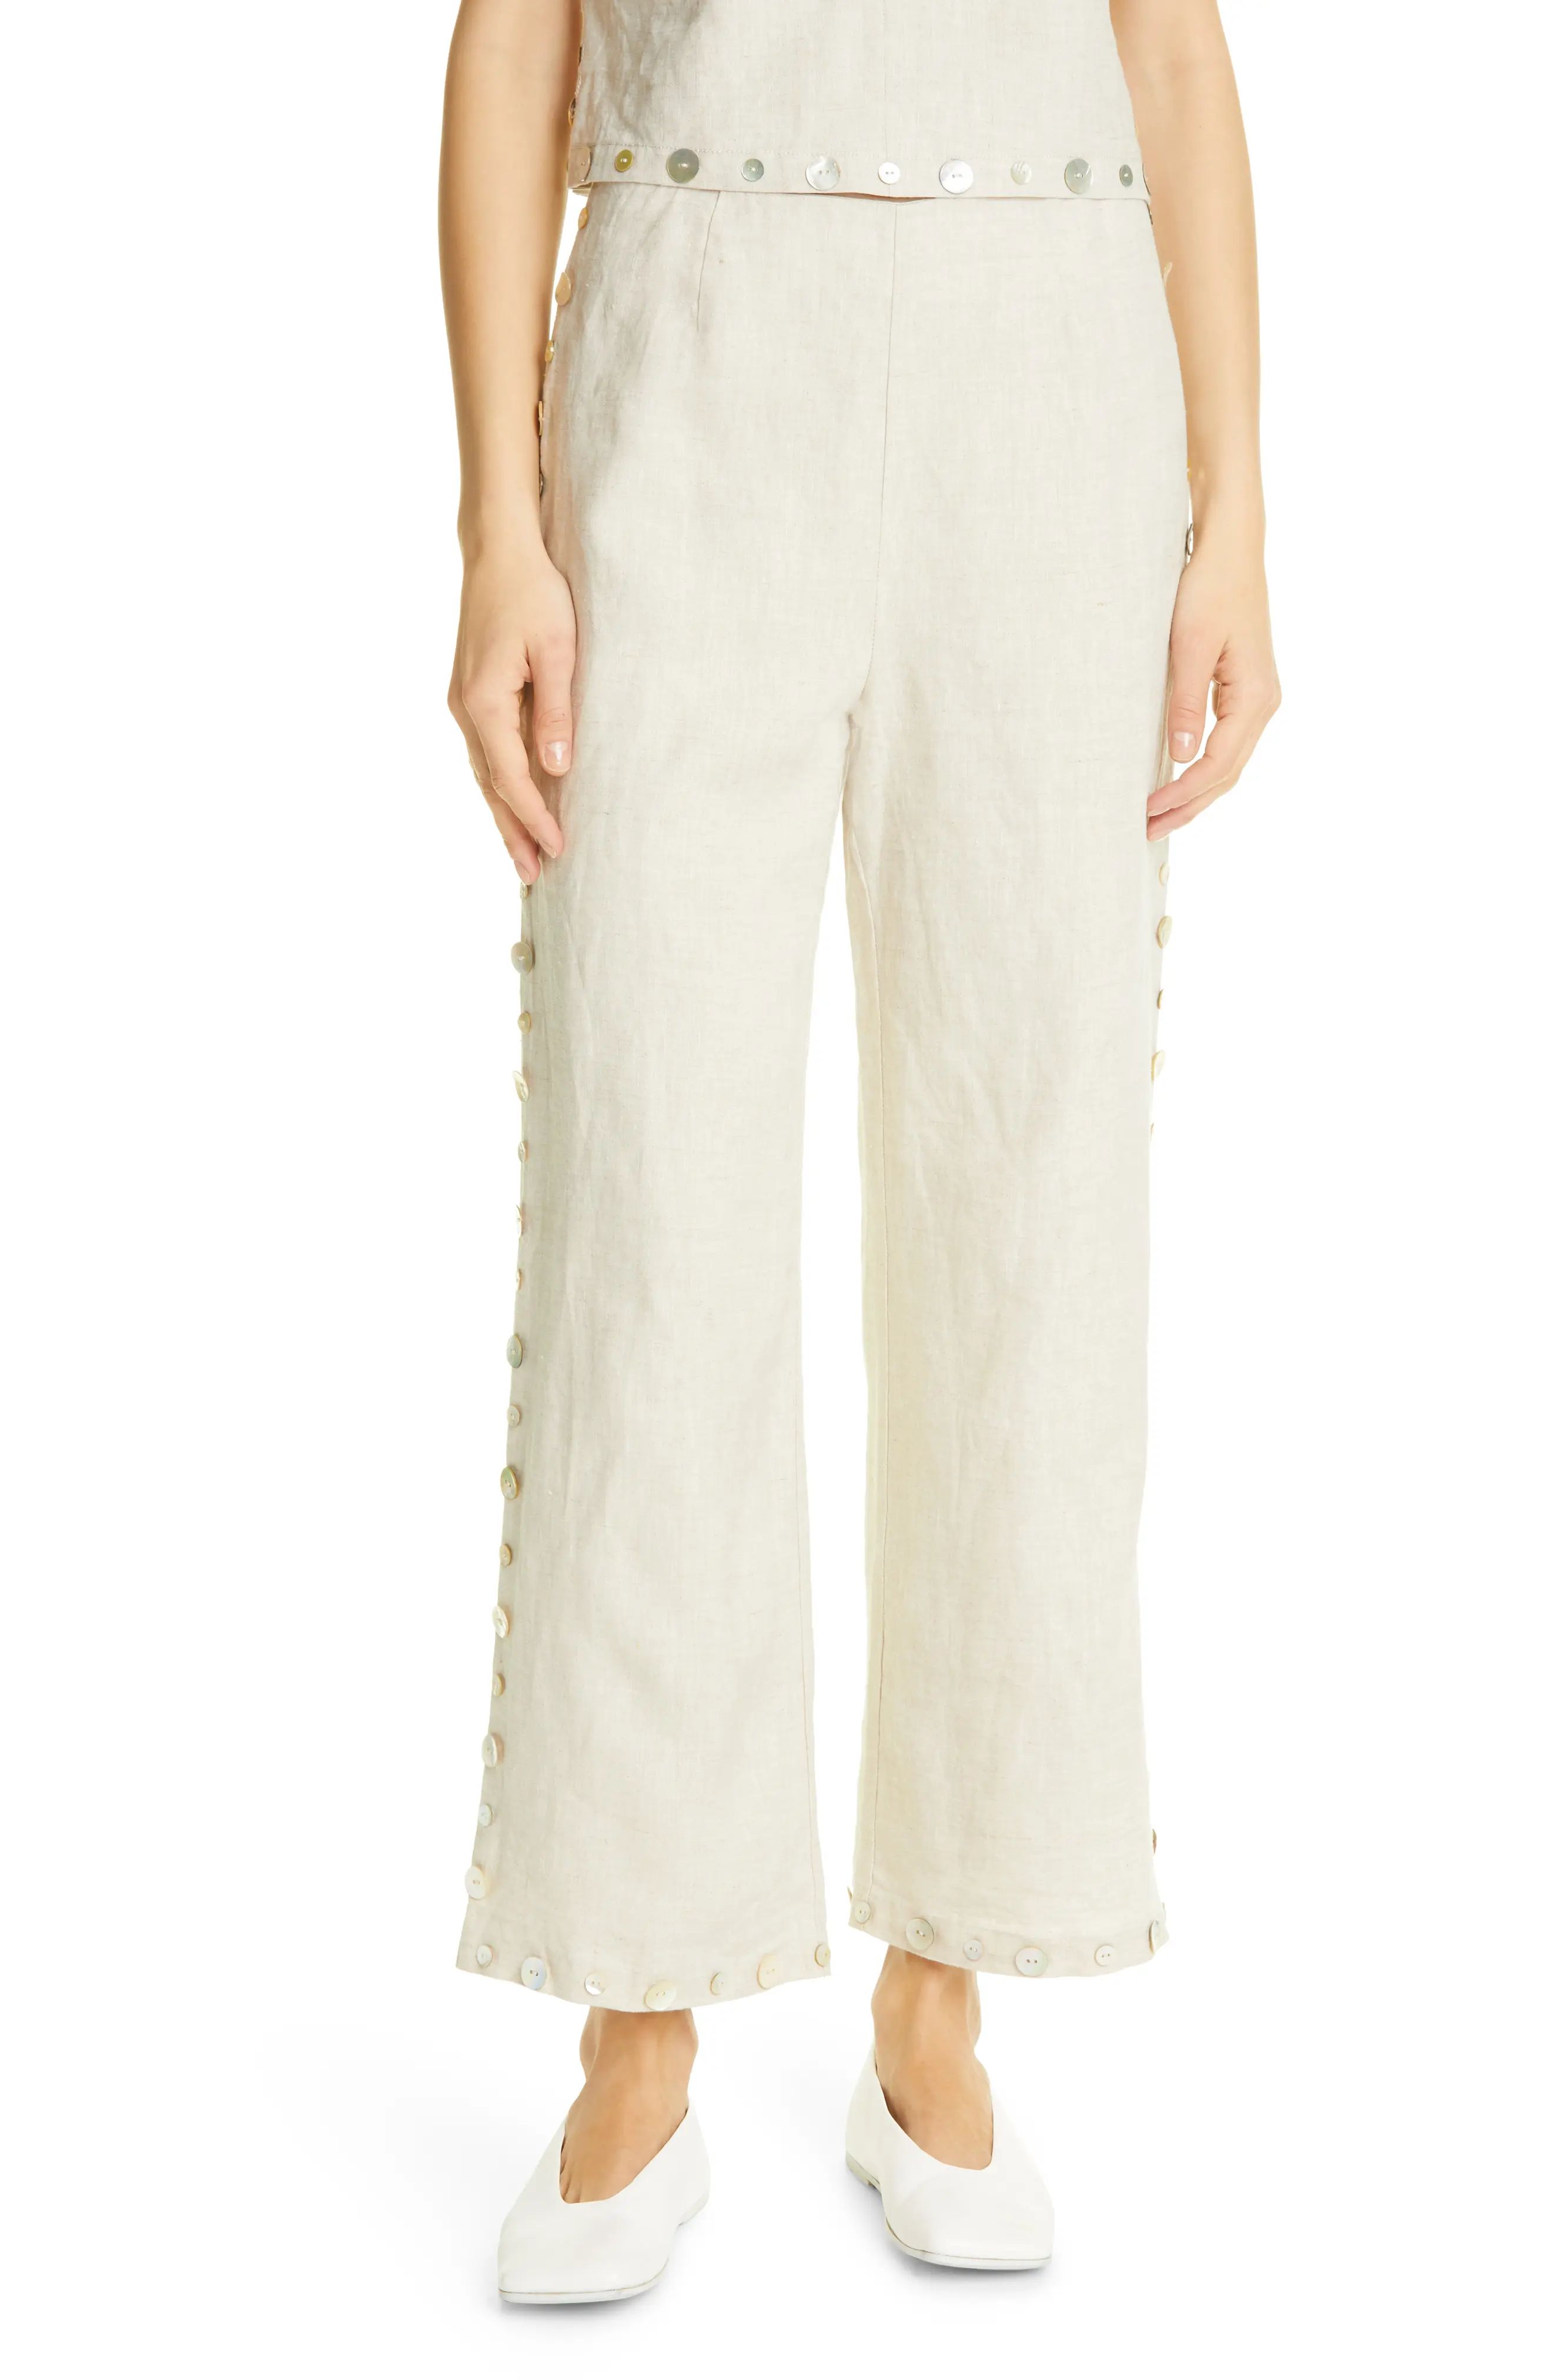 STAUD Ravella Button Trim Linen Pants in Natural at Nordstrom, Size 4 | Nordstrom